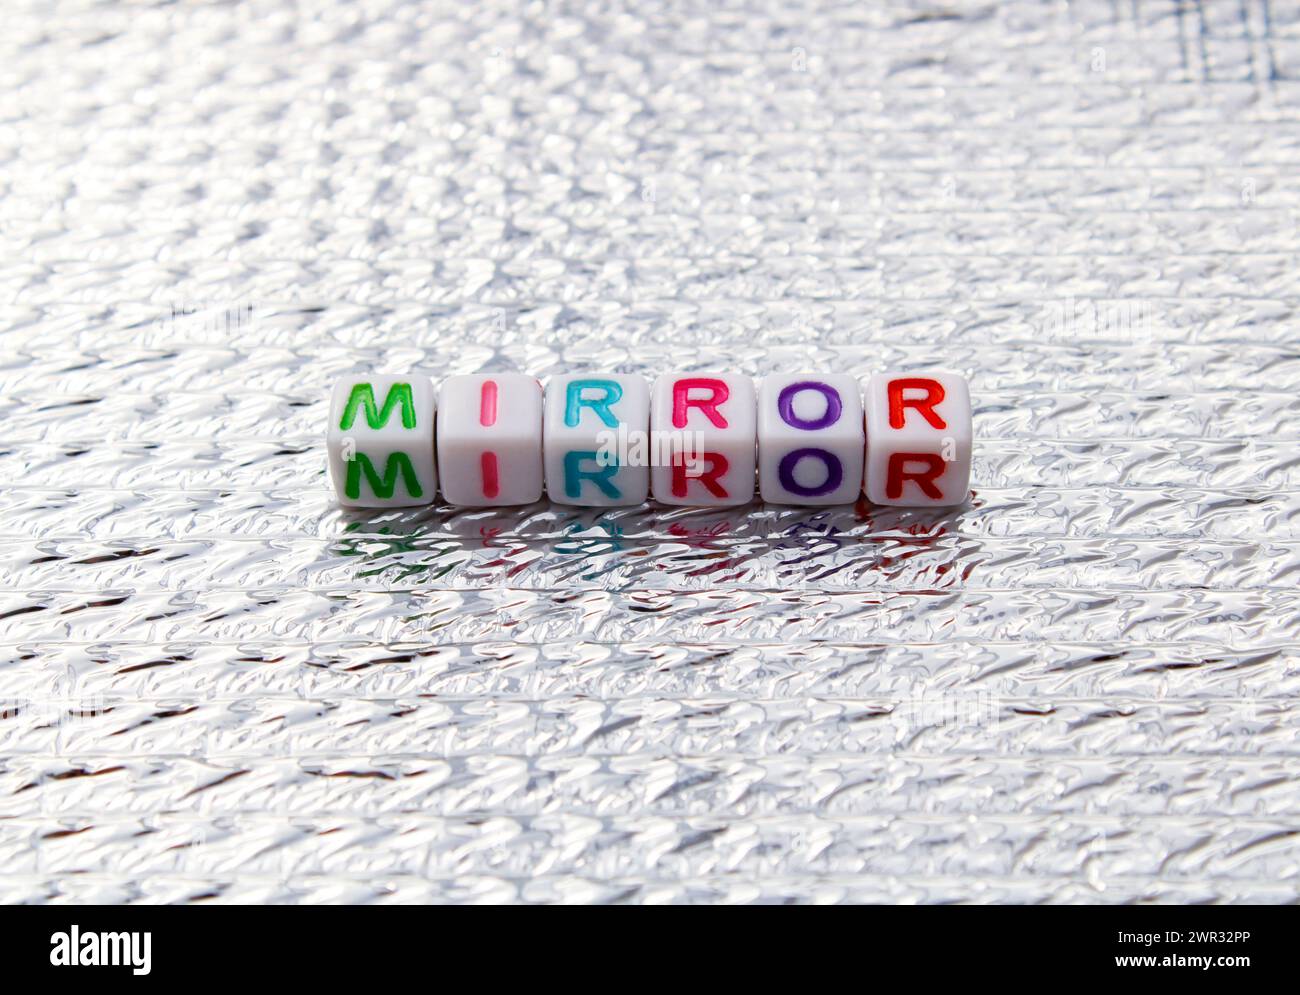 Mirror word composed with cubes on silver background Stock Photo